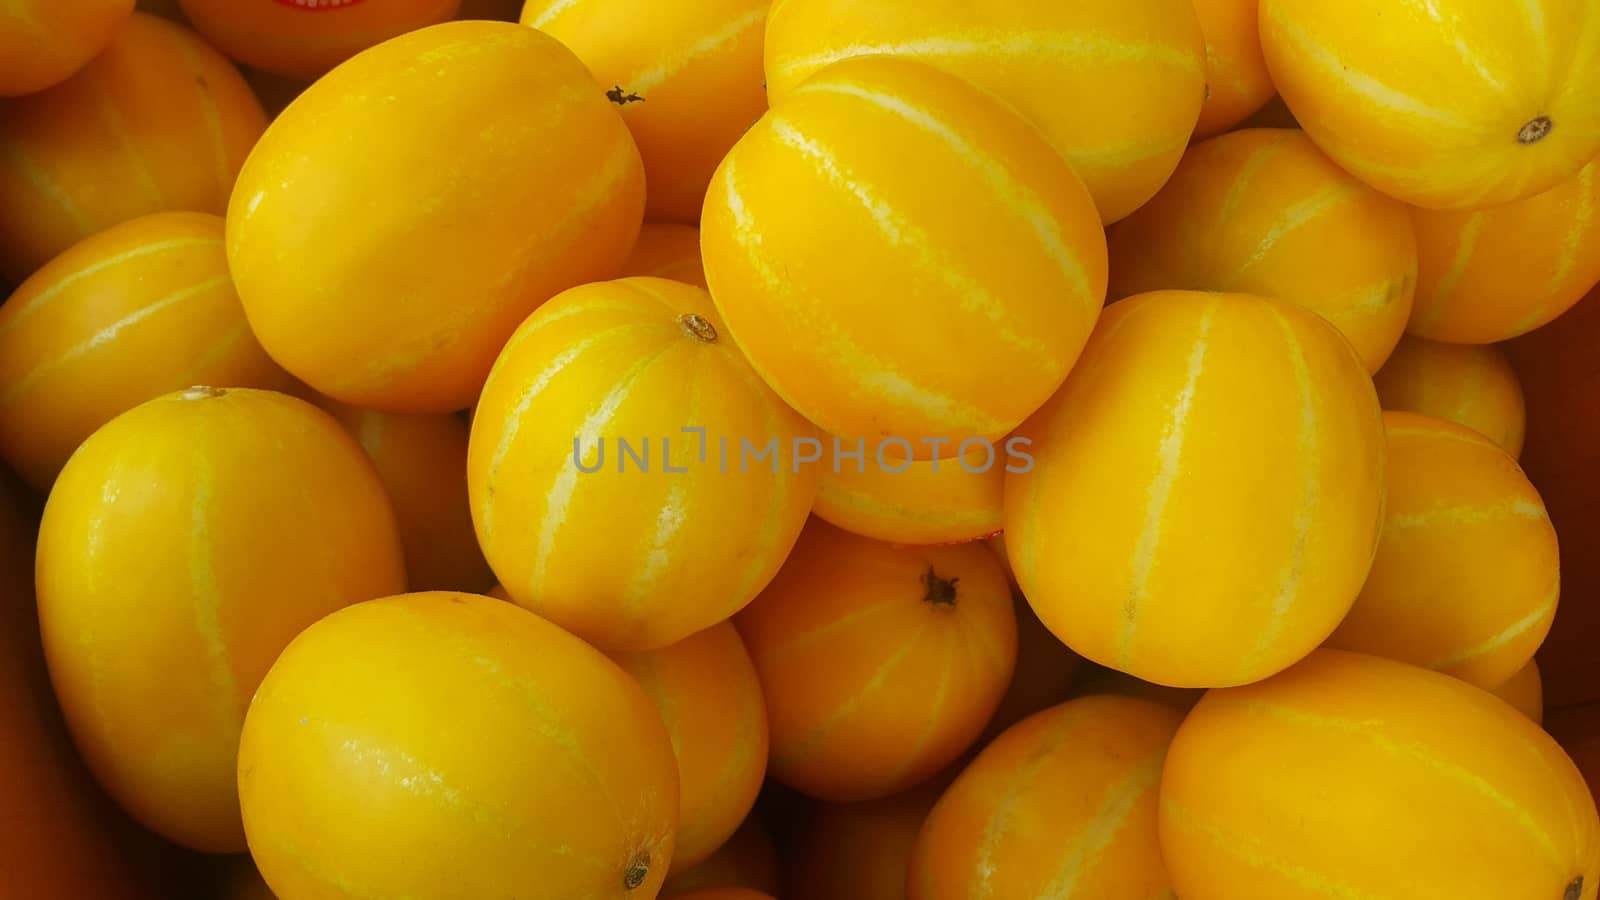 Fresh yellow melon or Canary melon or winter melon pile placed in market for sale. The Canary melon or winter melon is a large, bright-yellow elongated melon with a pale green to white inner flesh.